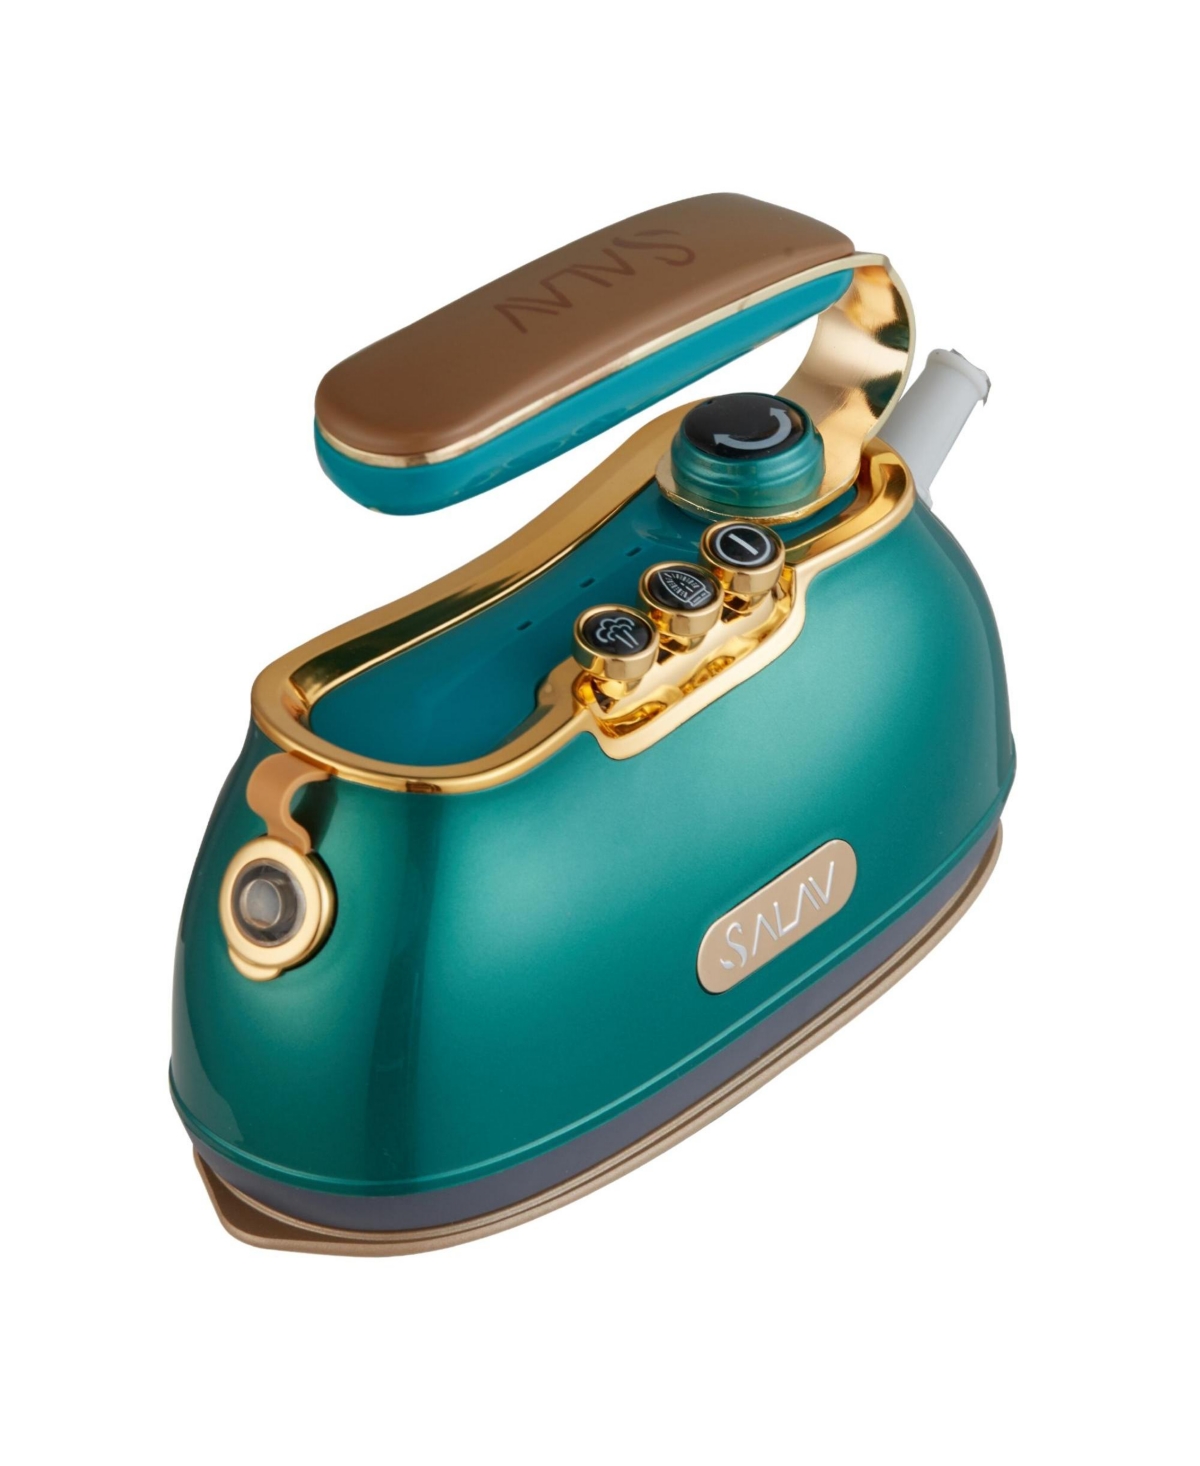 Salav Is-900 Retro Edition Duopress Steamer And Iron In Emerald